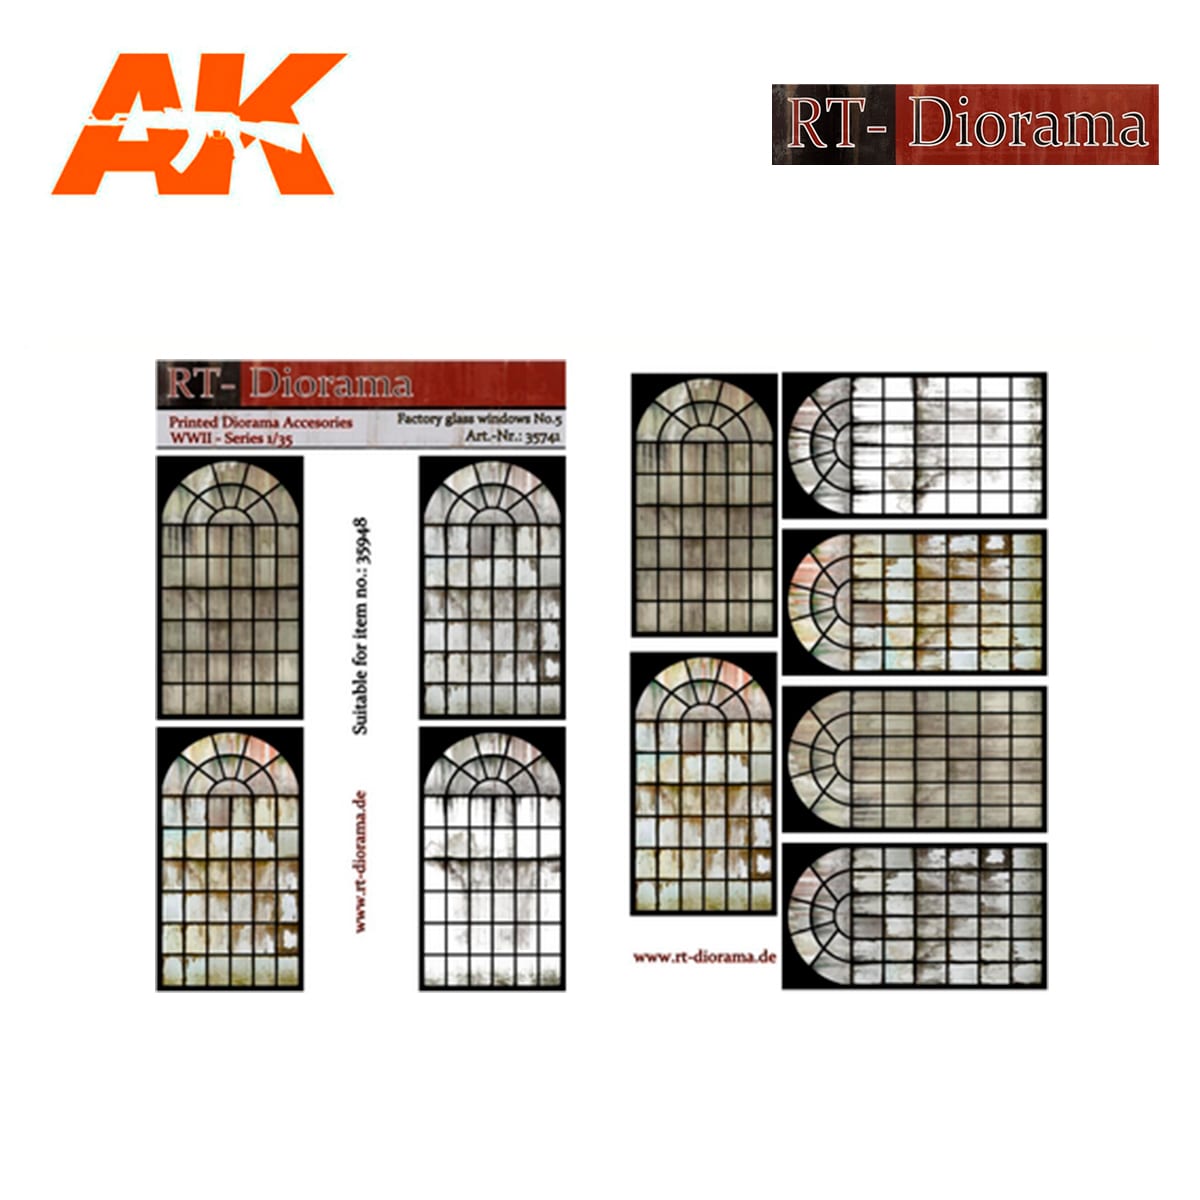 Printed Accesories: Factory glass windows Nr.5